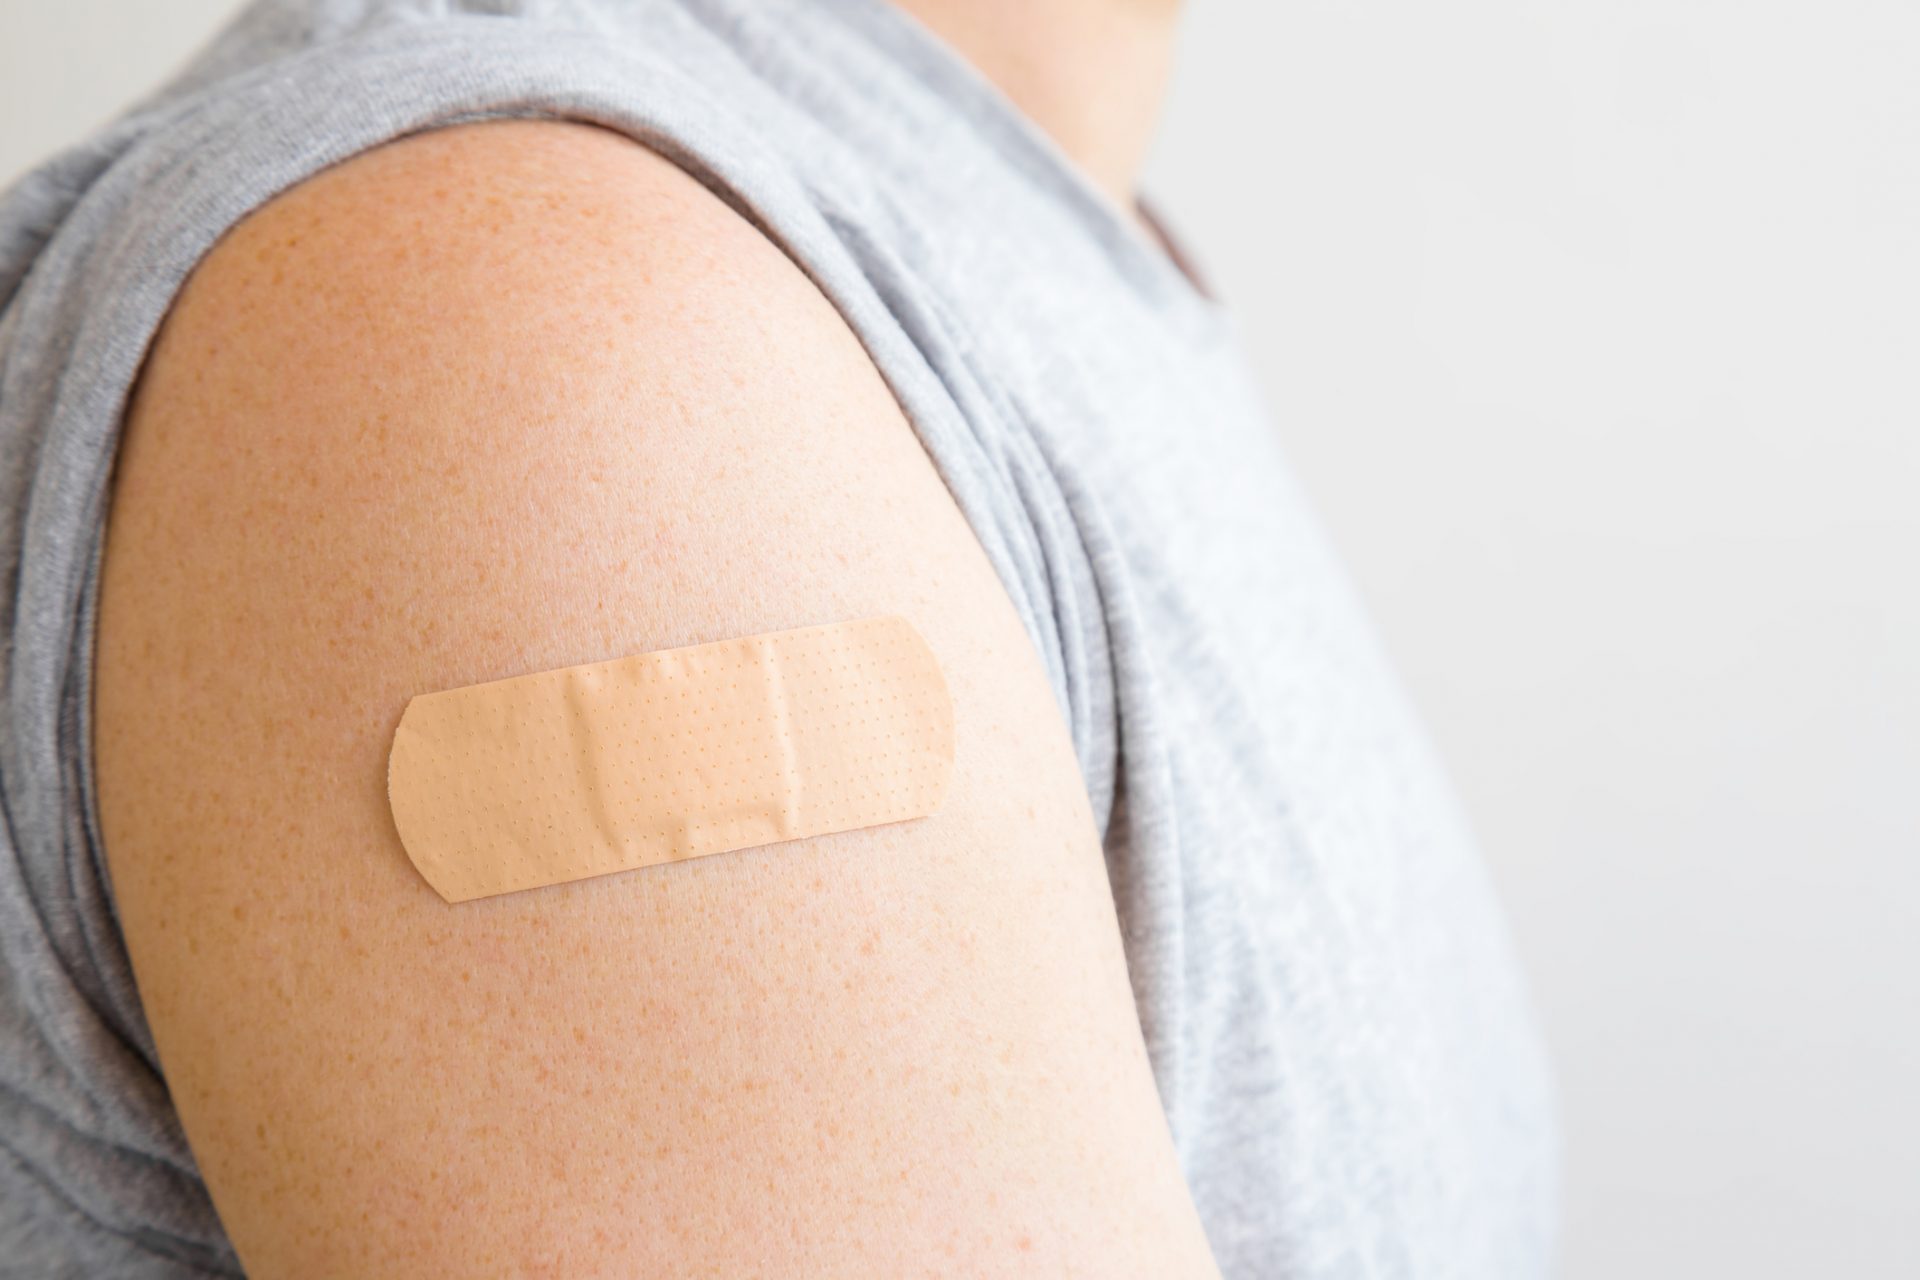 Brown adhesive bandage on young man's arm after scratch on skin or injection of vaccine. First aid. Medical, pharmacy and healthcare concept. Closeup.